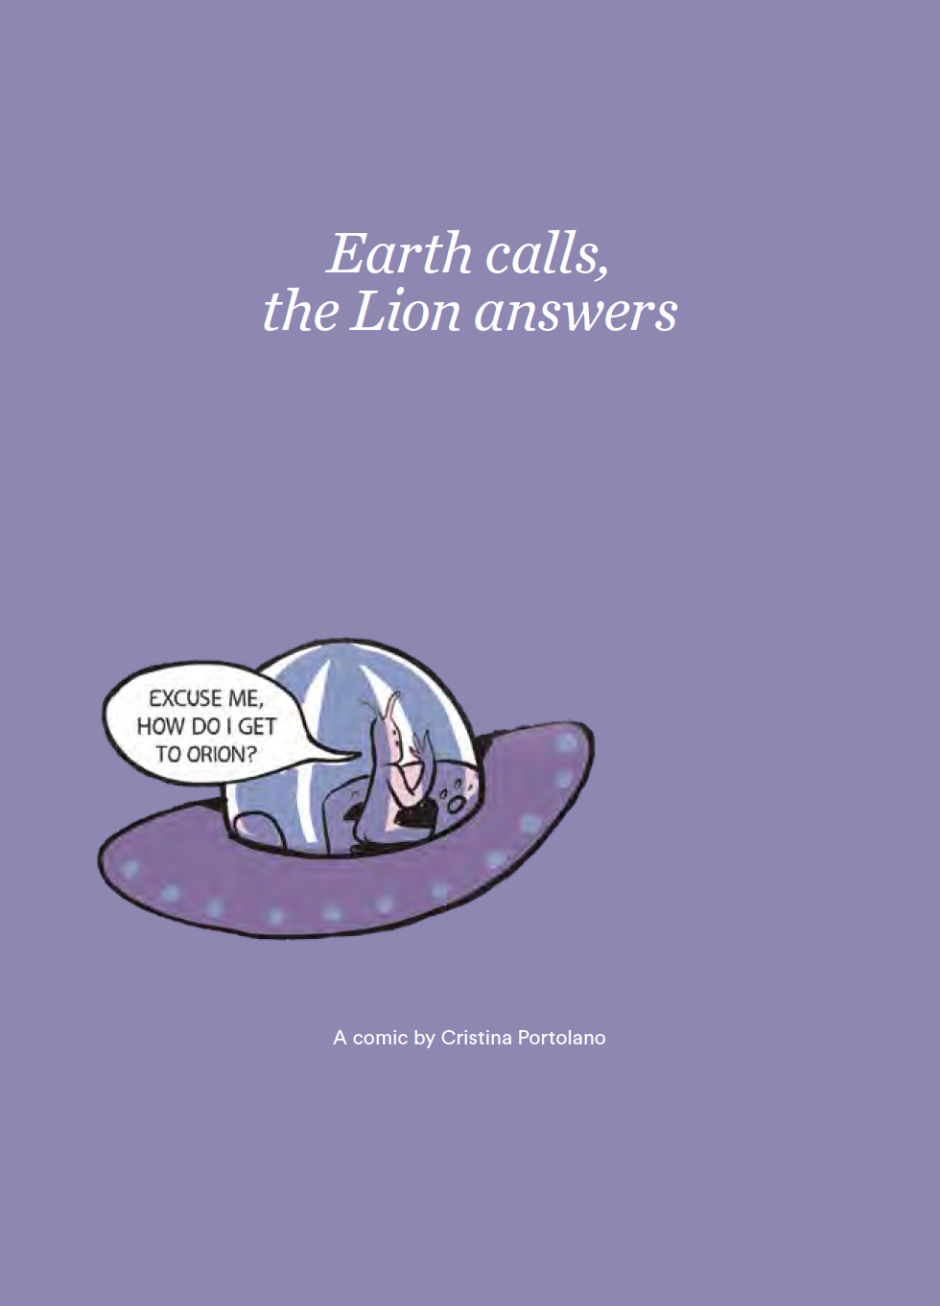 Earth calls, the Lion answers